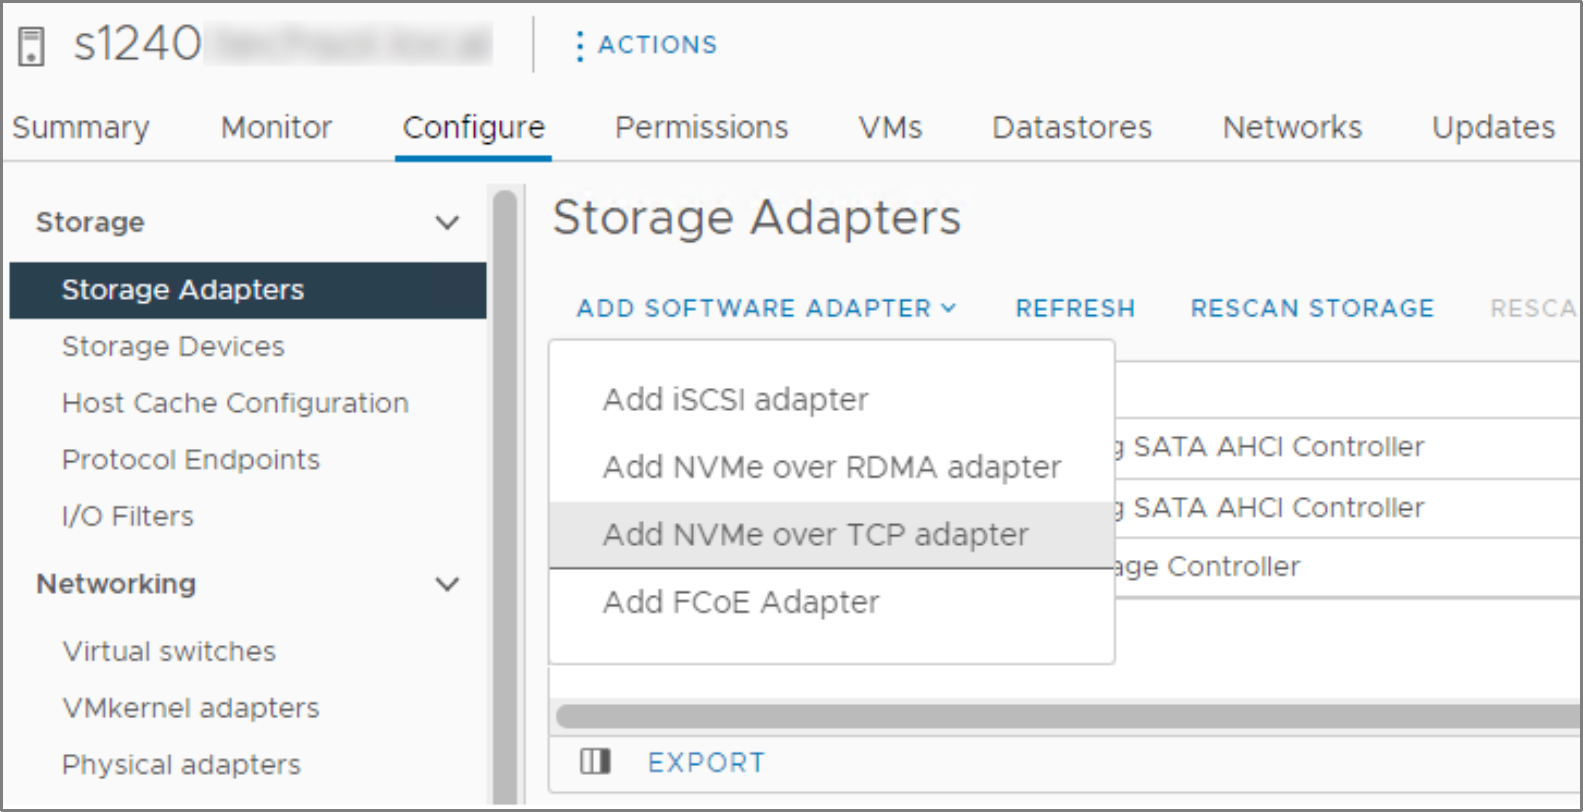 Workflow to add NVMe over TCP adapter in the vSphere Client.